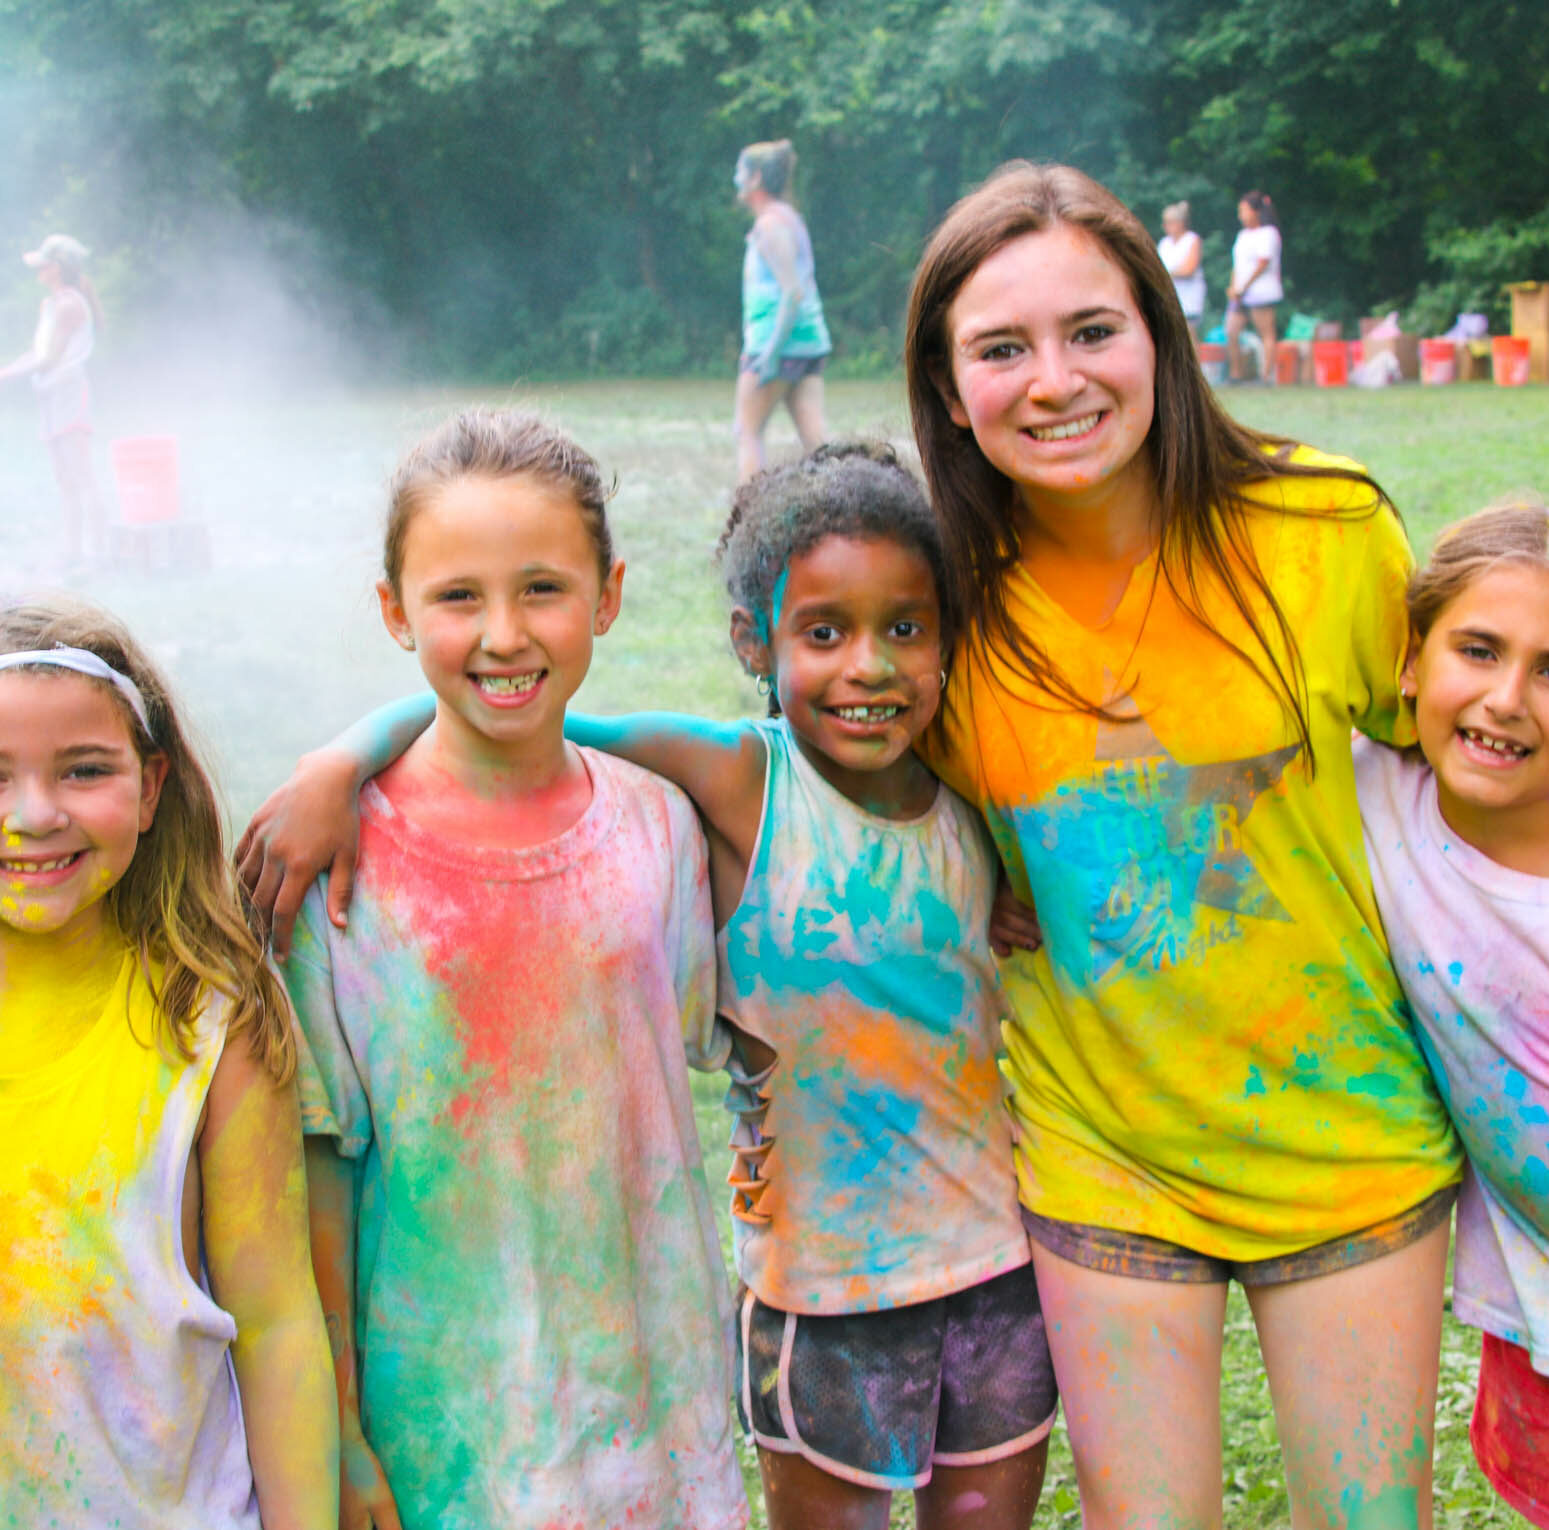 Staff and campers with colored shirts after the color run.